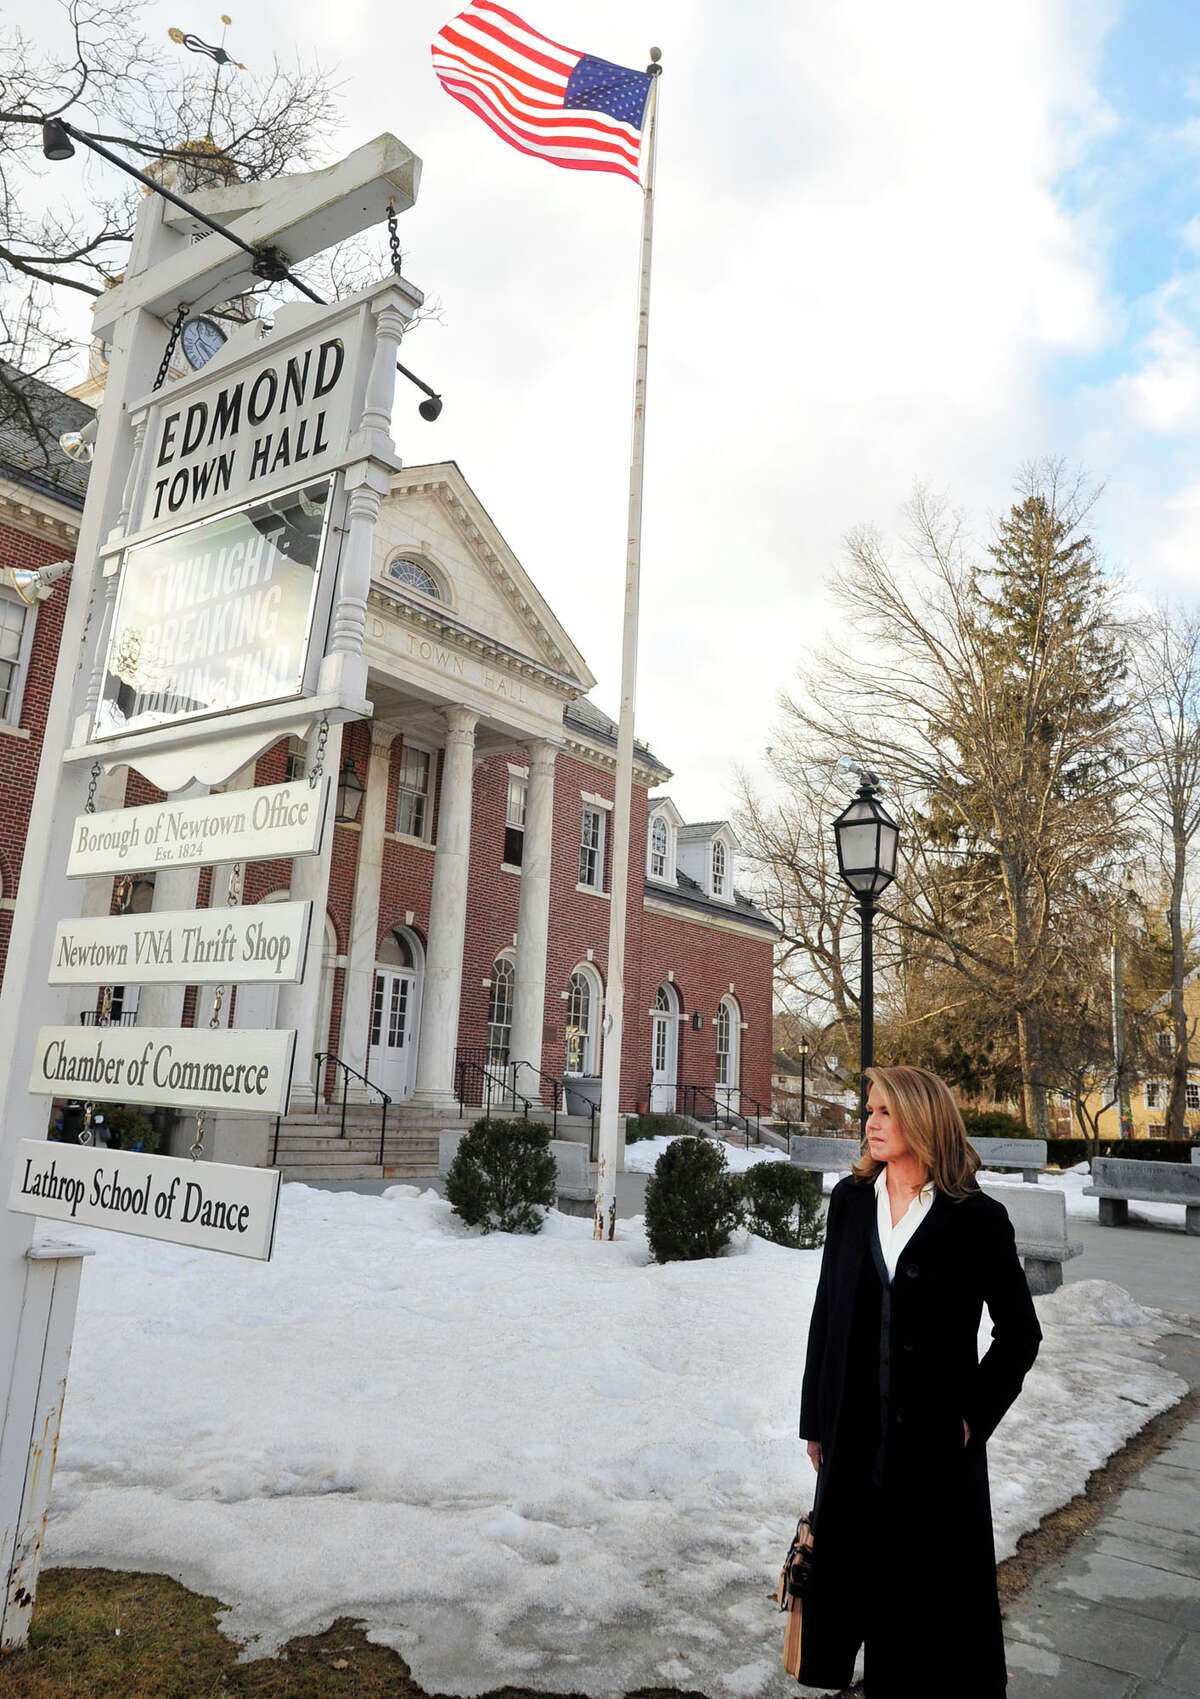 Katie Couric leaves Edmond Town Hall in Newtown, Conn. after taping a show about the Sandy Hook shootings, Monday, Feb. 25, 2013.